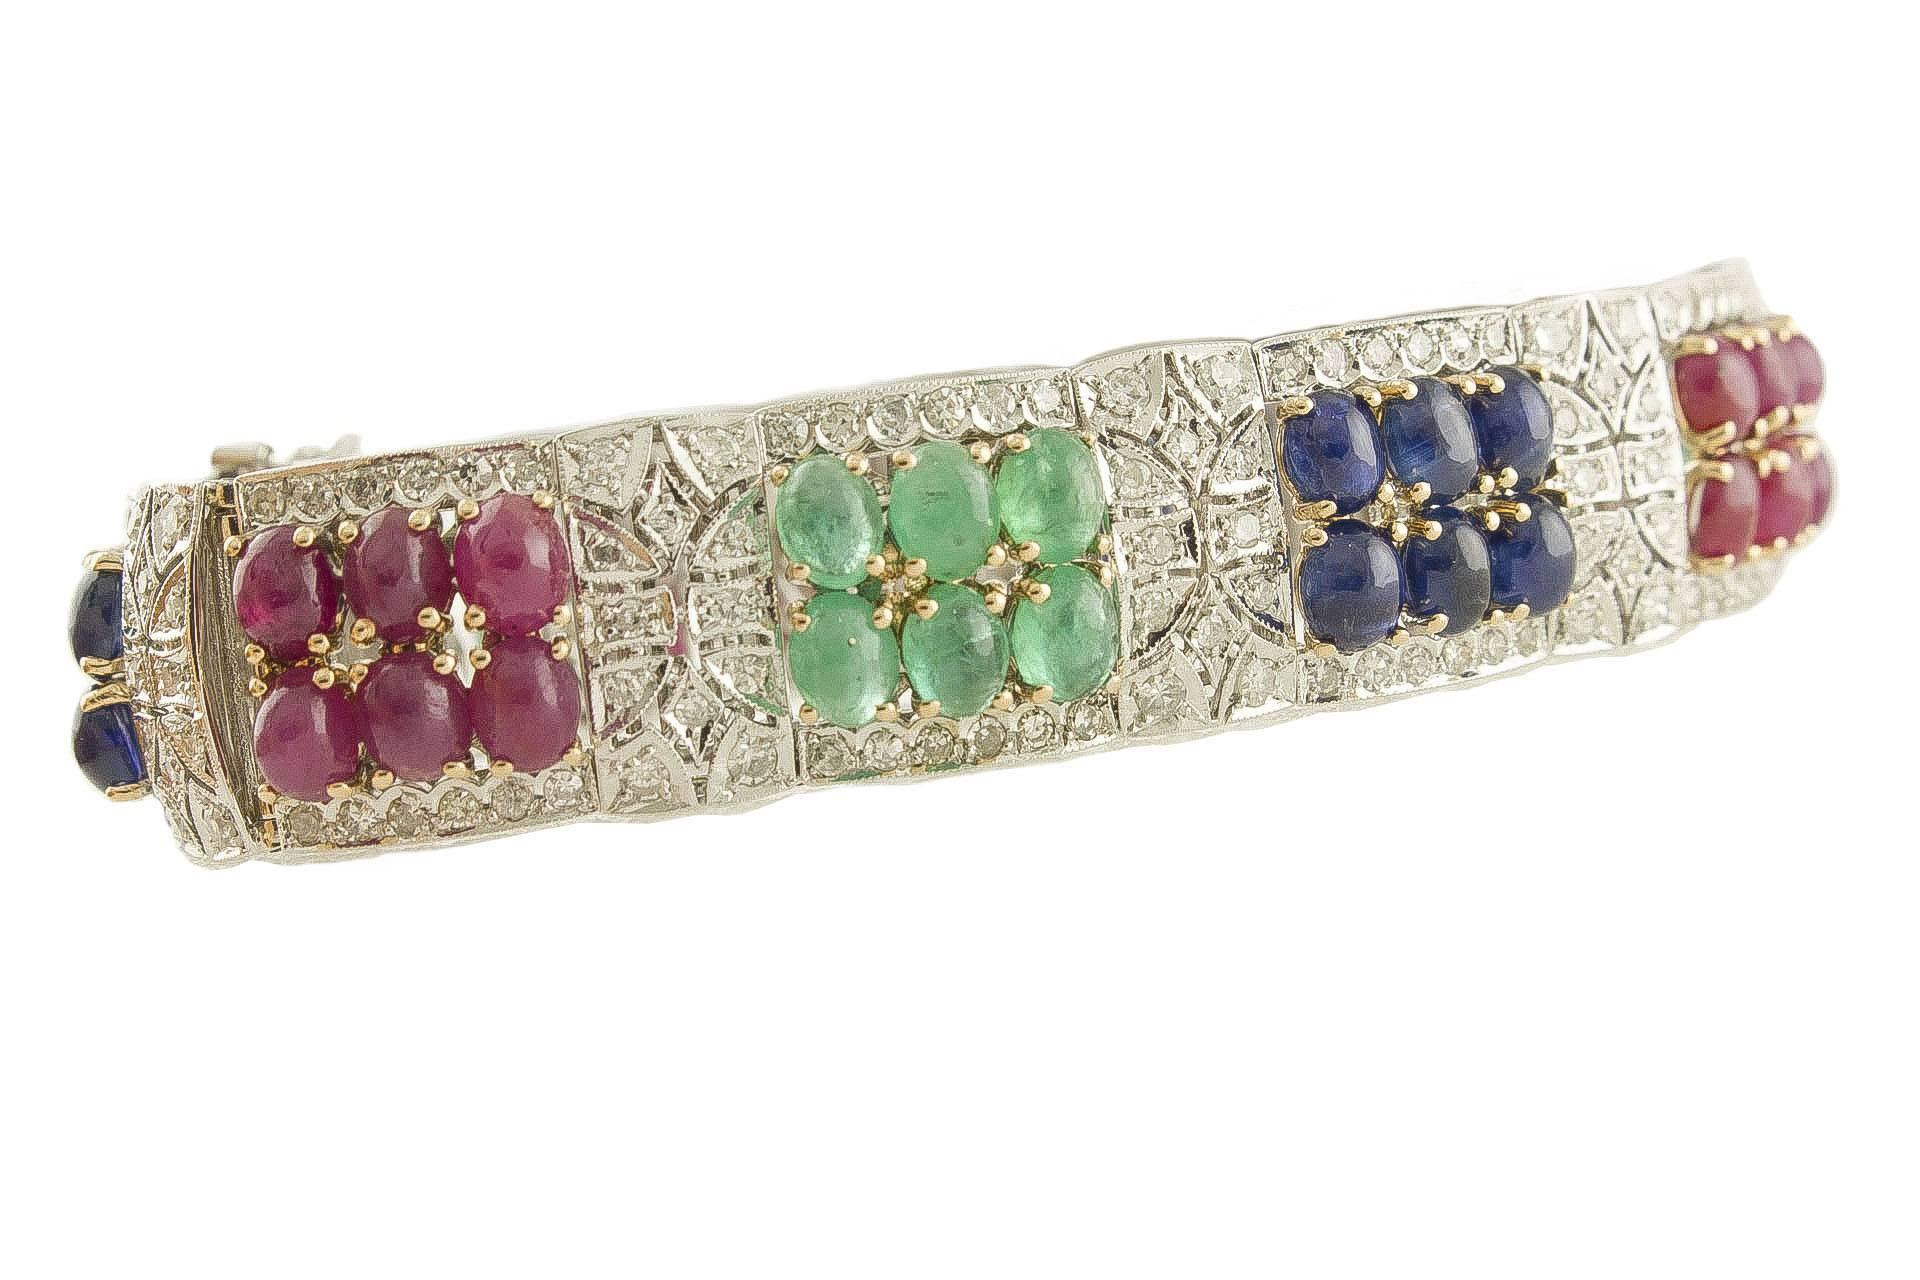 14k white gold bracelet composed of white diamonds, rubies, blue sapphires and emeralds.
Diamonds 4.10 ct 
Rubies, blue sapphires, emeralds 33.13 ct 
Tot.weight 37.80 g
R.F gghch
